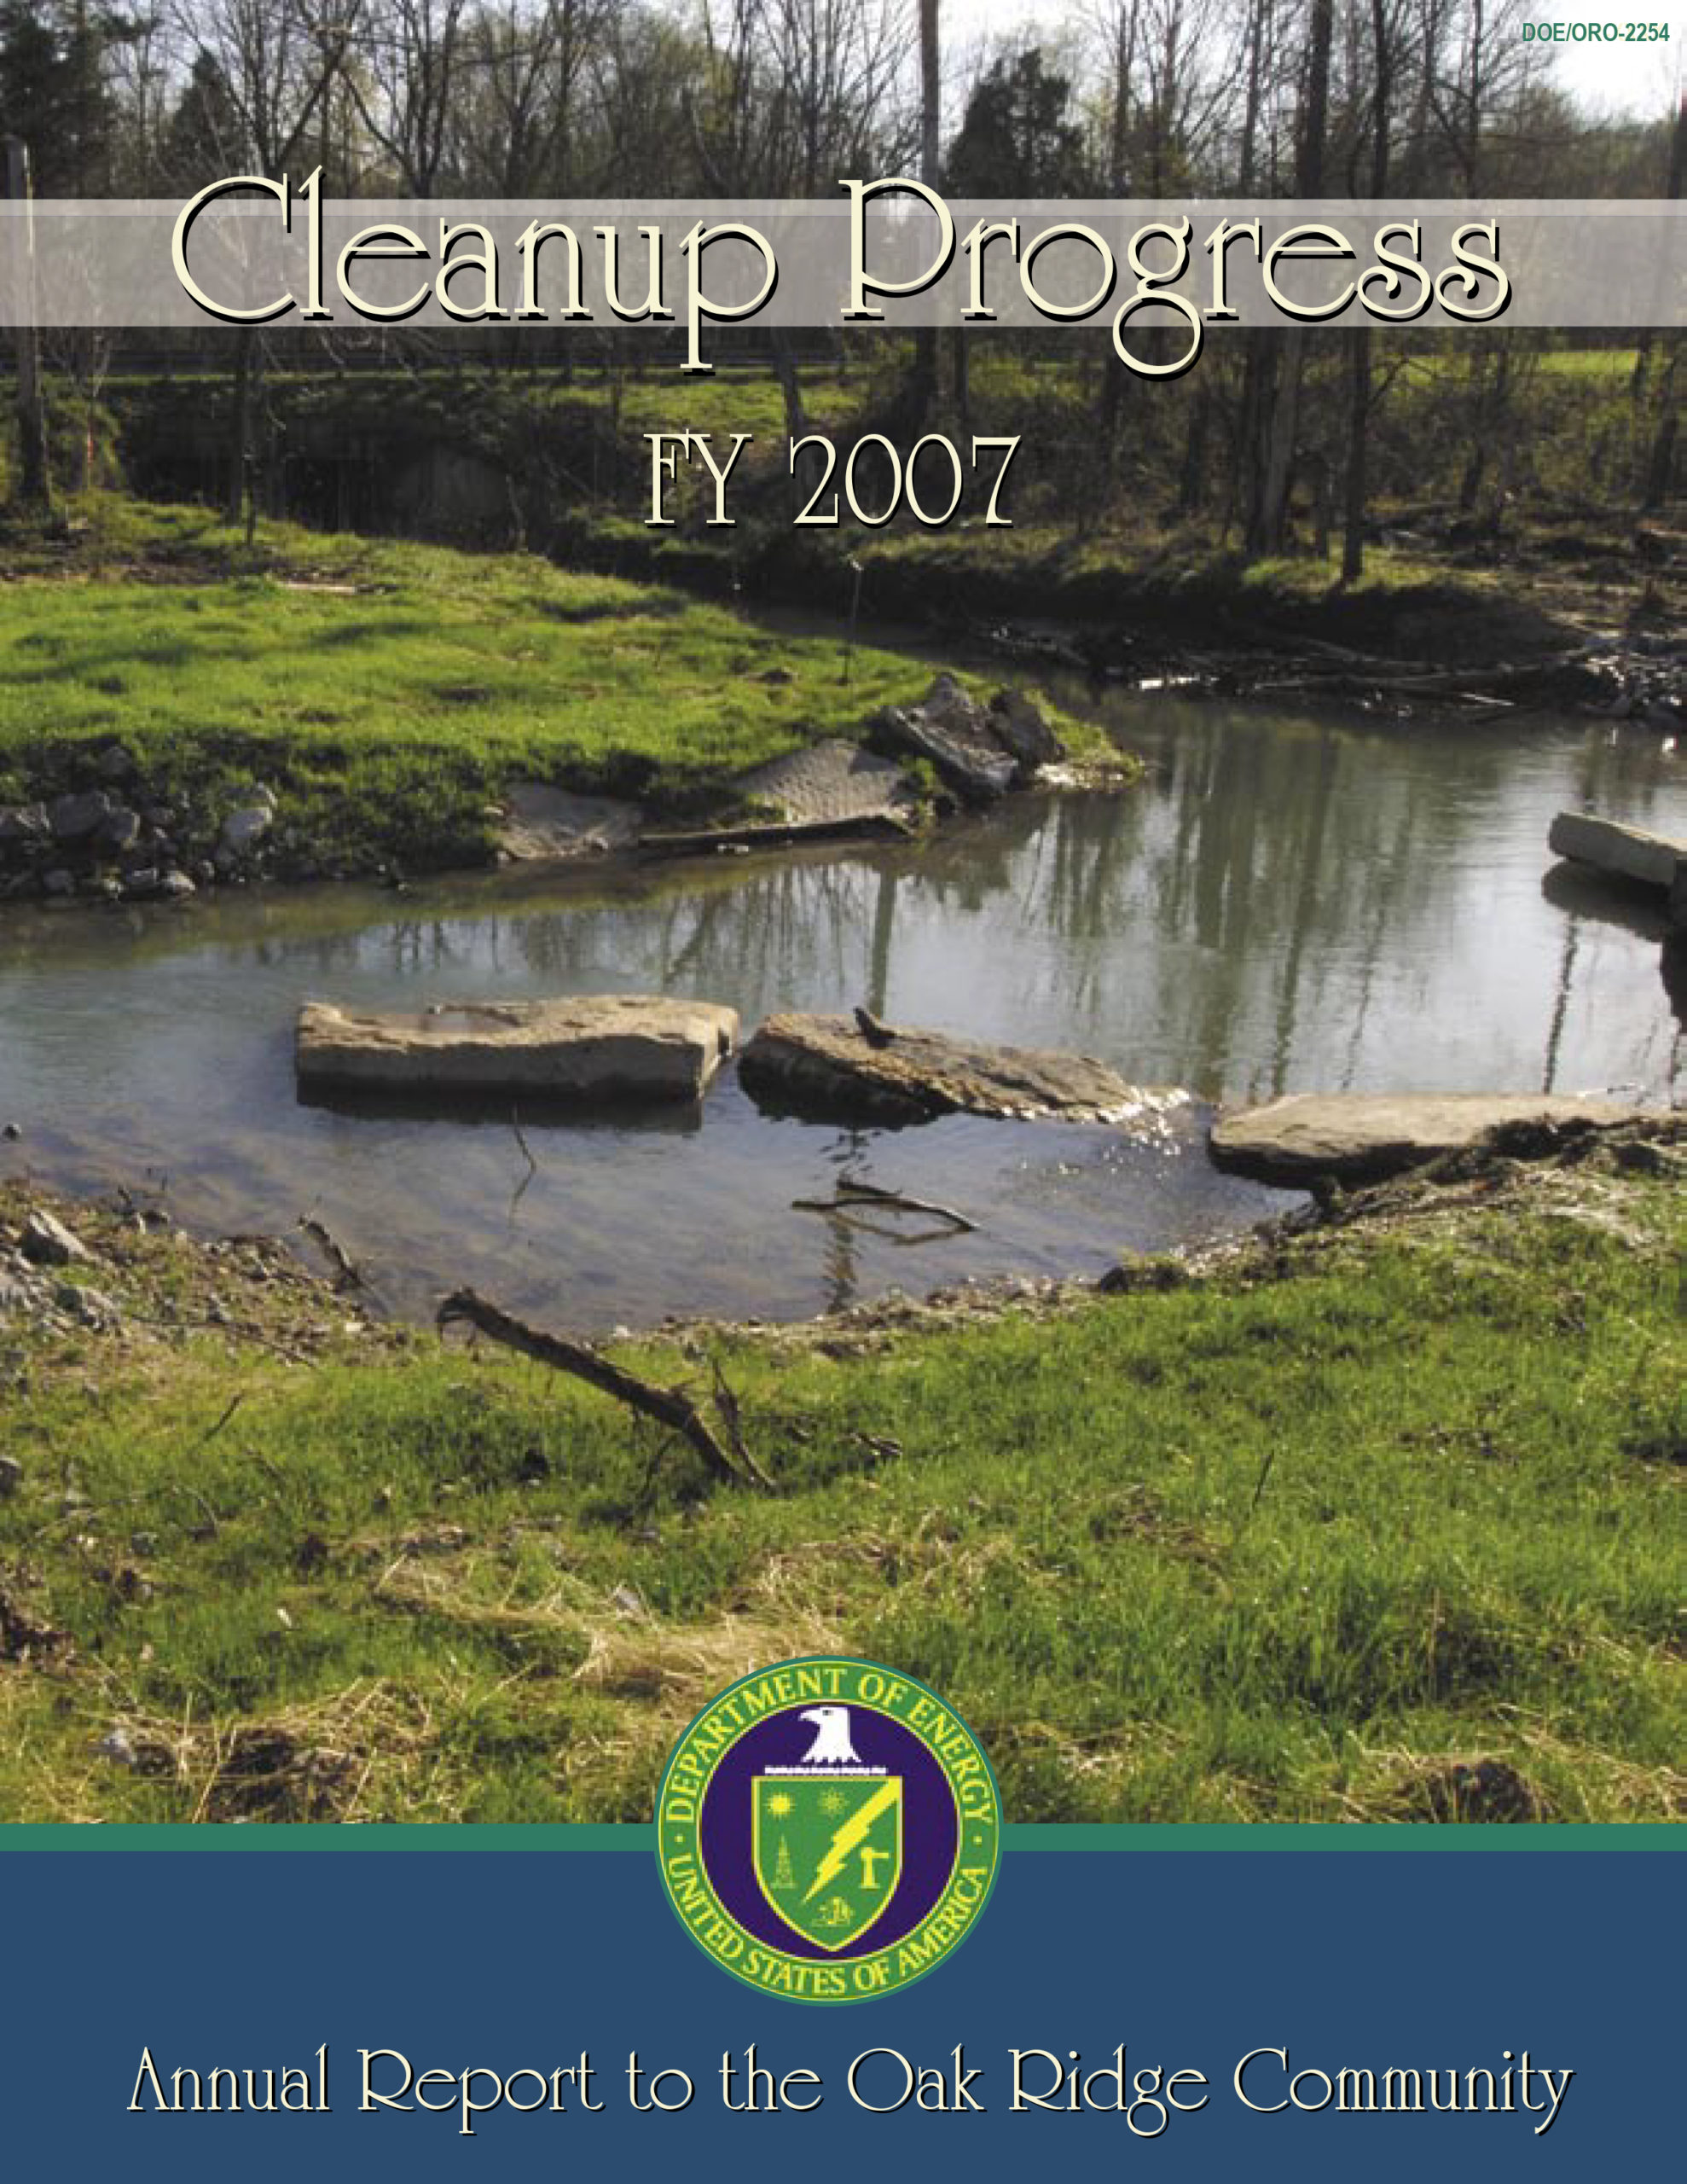 2007 Cleanup Progress cover